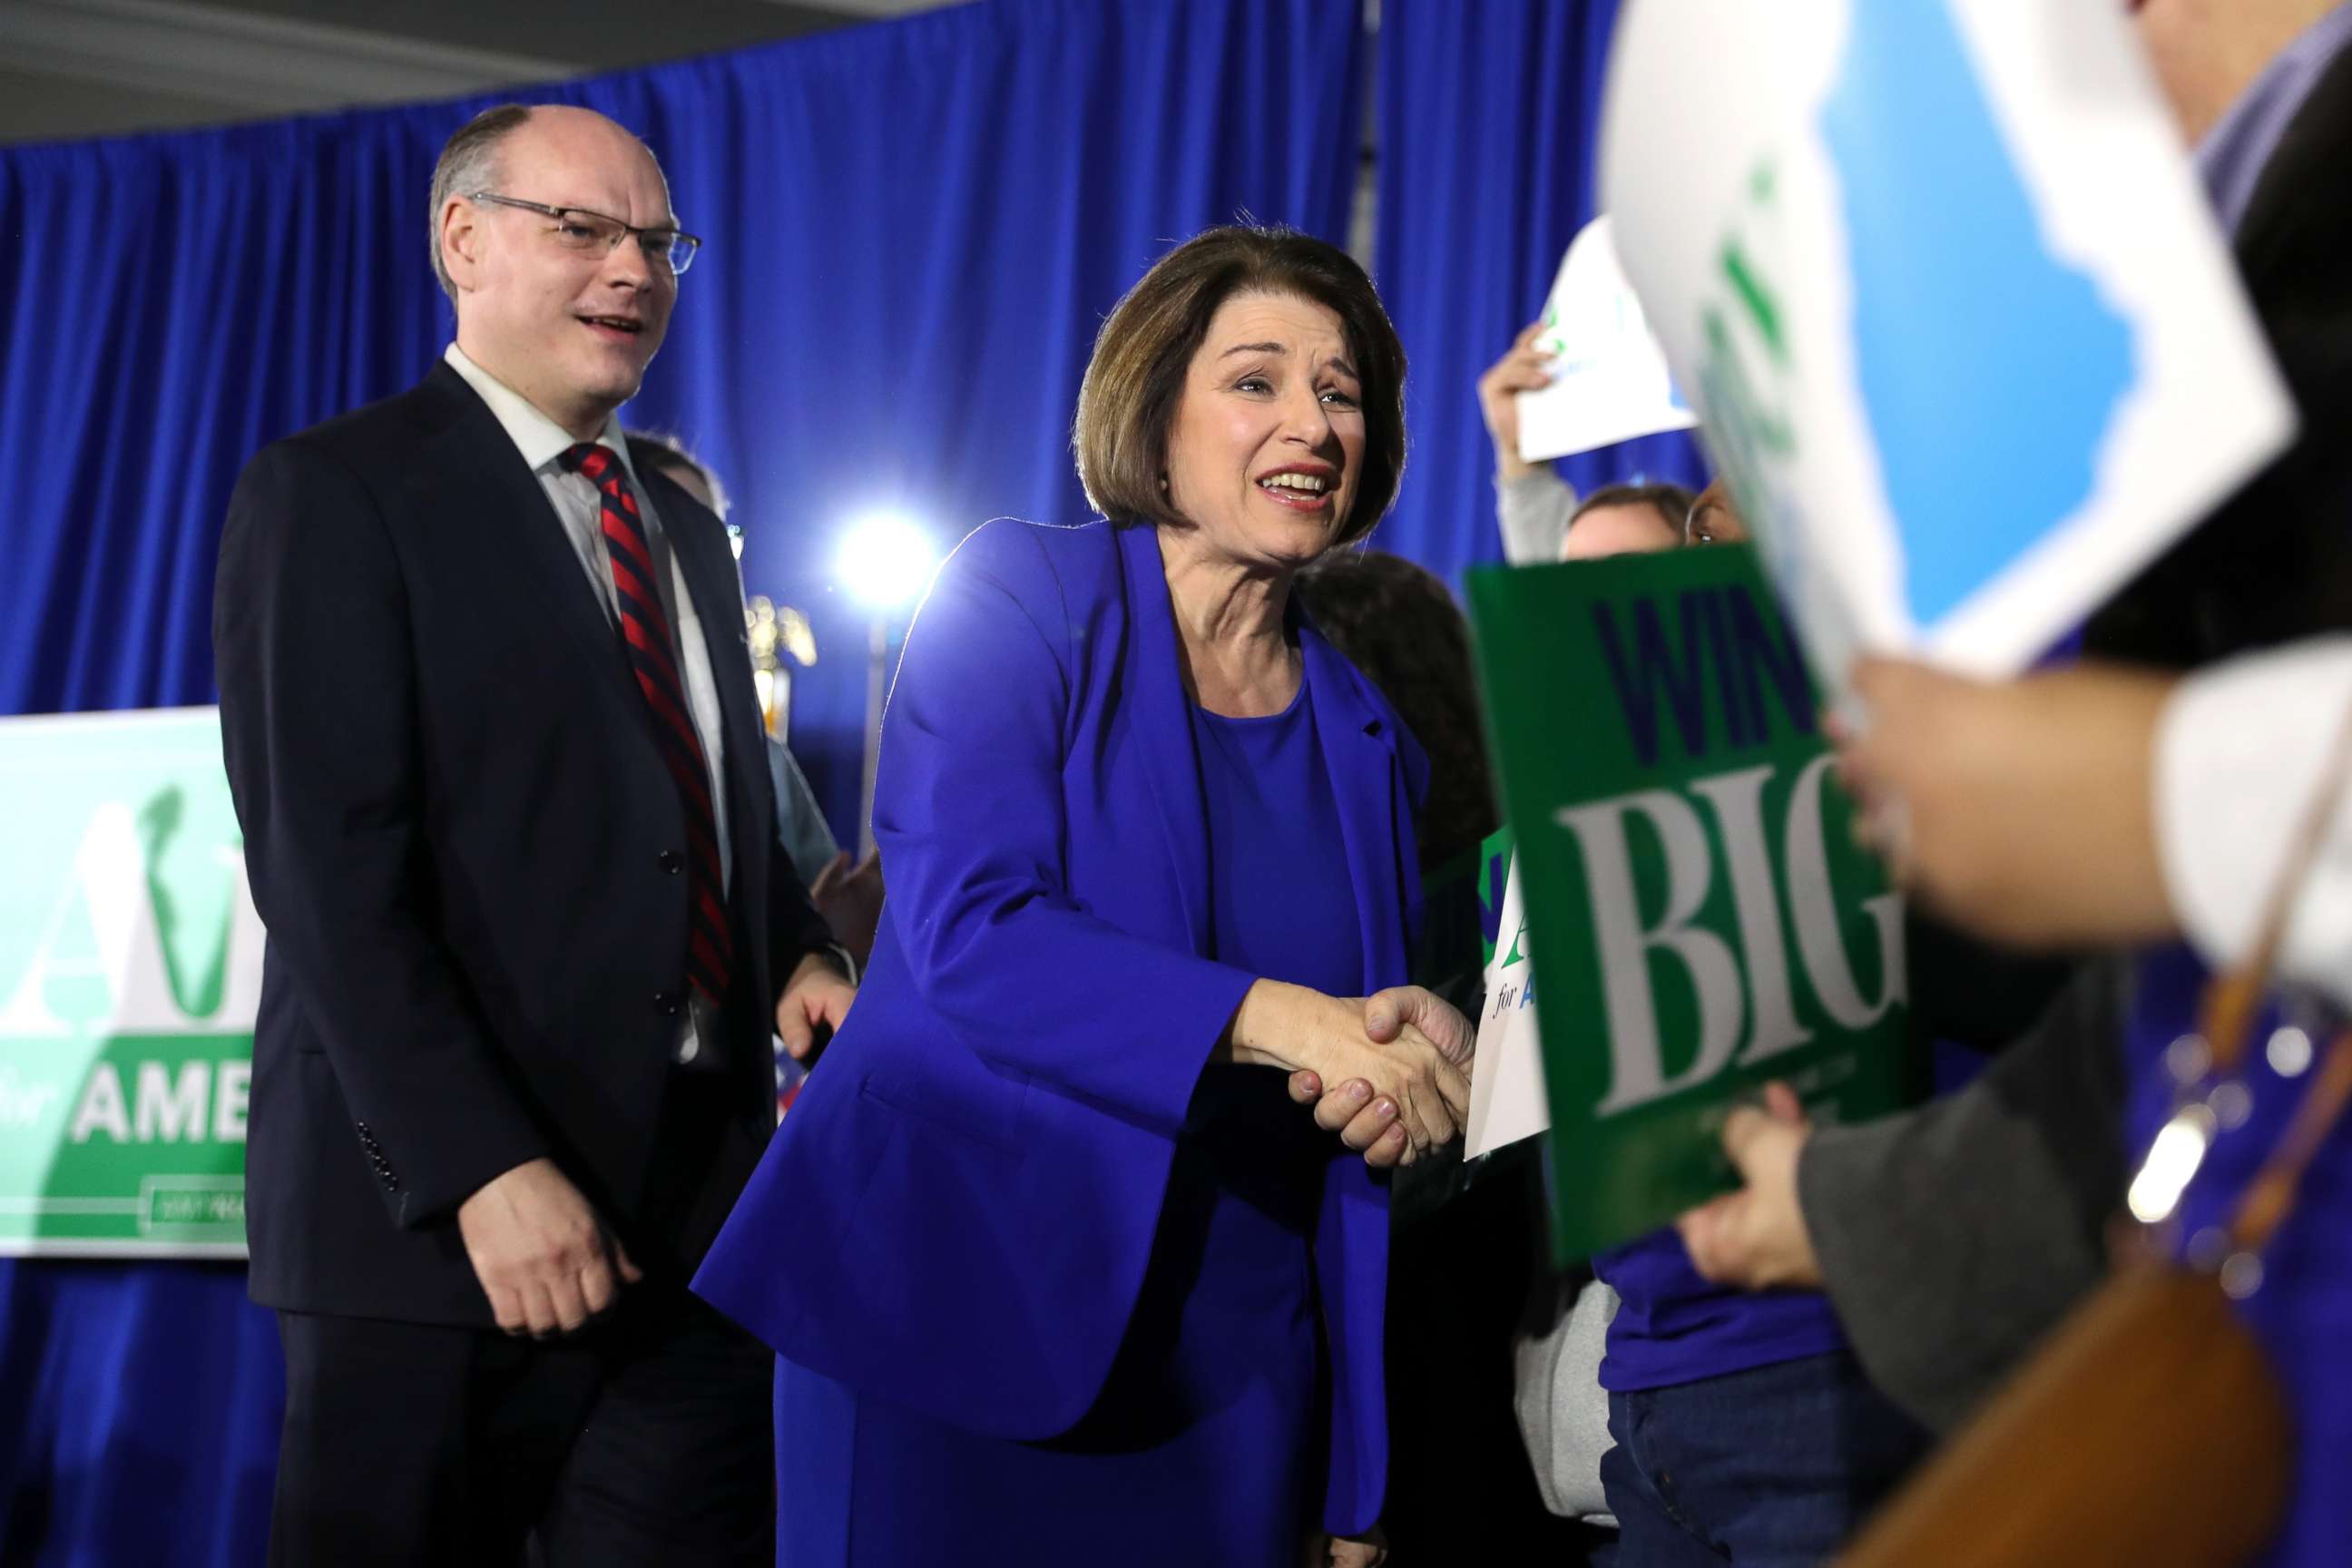 PHOTO: Then-Democratic presidential candidate Sen. Amy Klobuchar takes the stage with spouse John Bessler during a primary night event at the Grappone Conference Center, Feb. 11, 2020 in Concord, N.H.